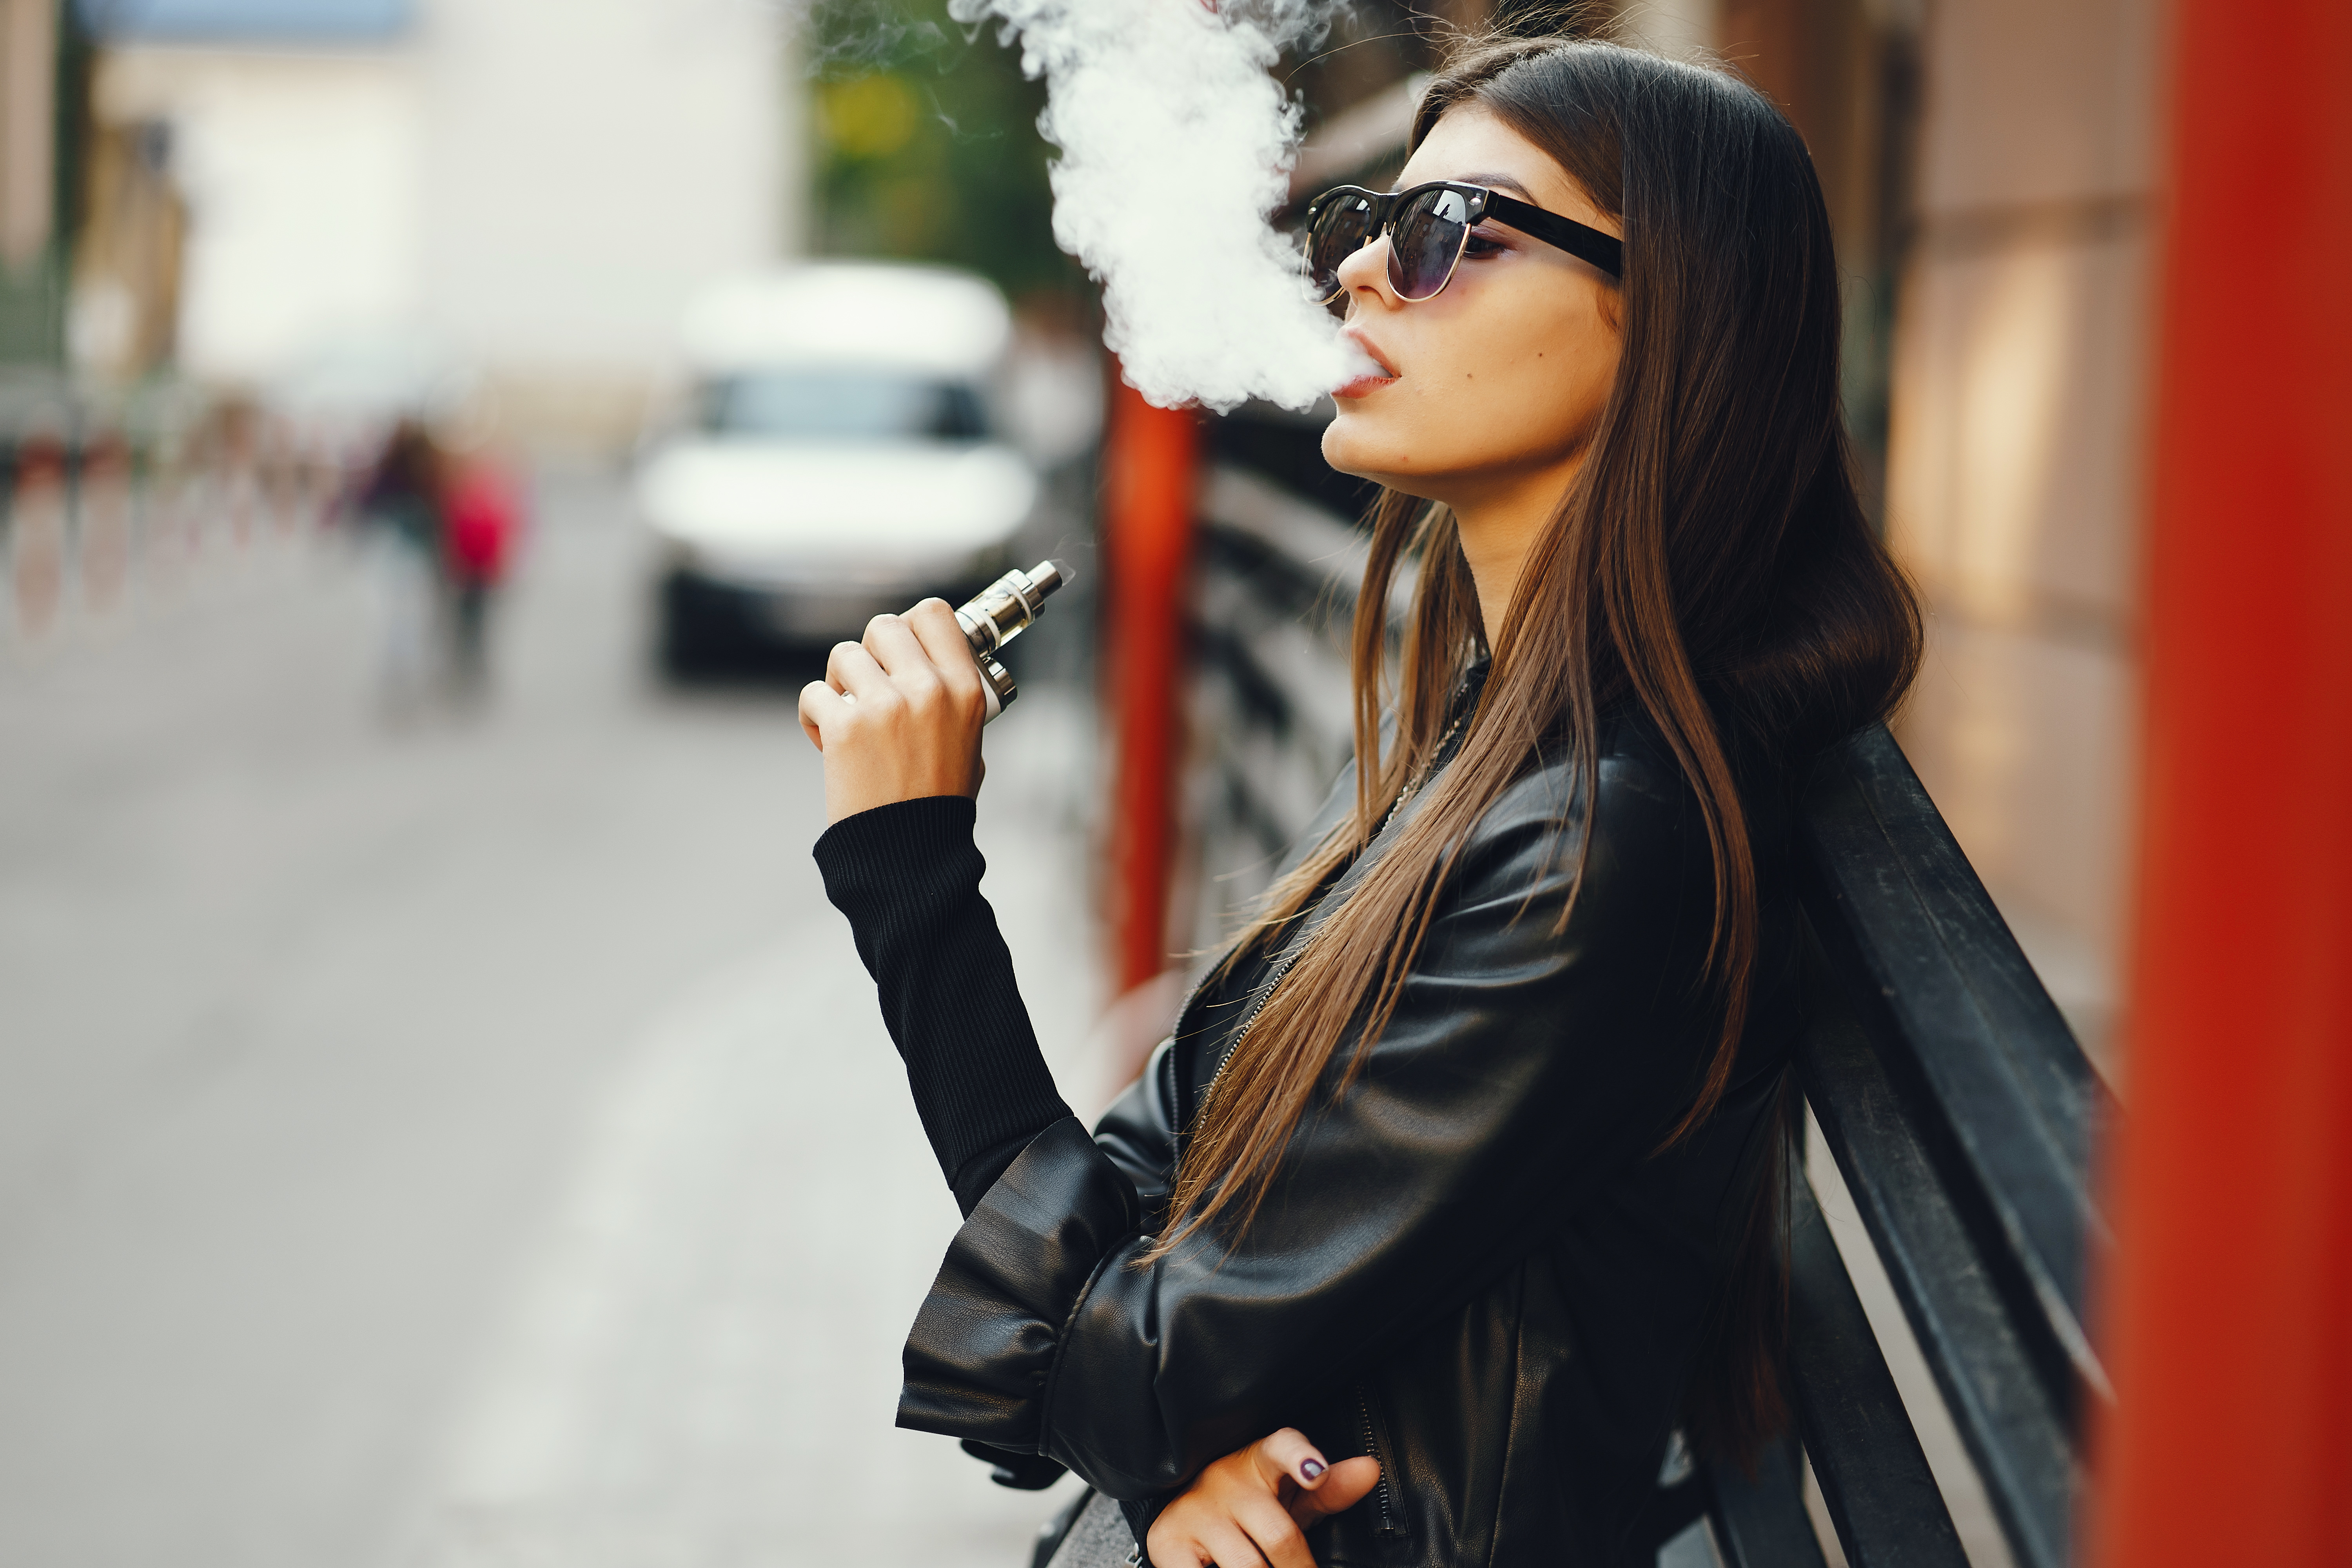 Coalition Supports Trump Administration’s Ban on Flavored E-Cigarettes/Vaping